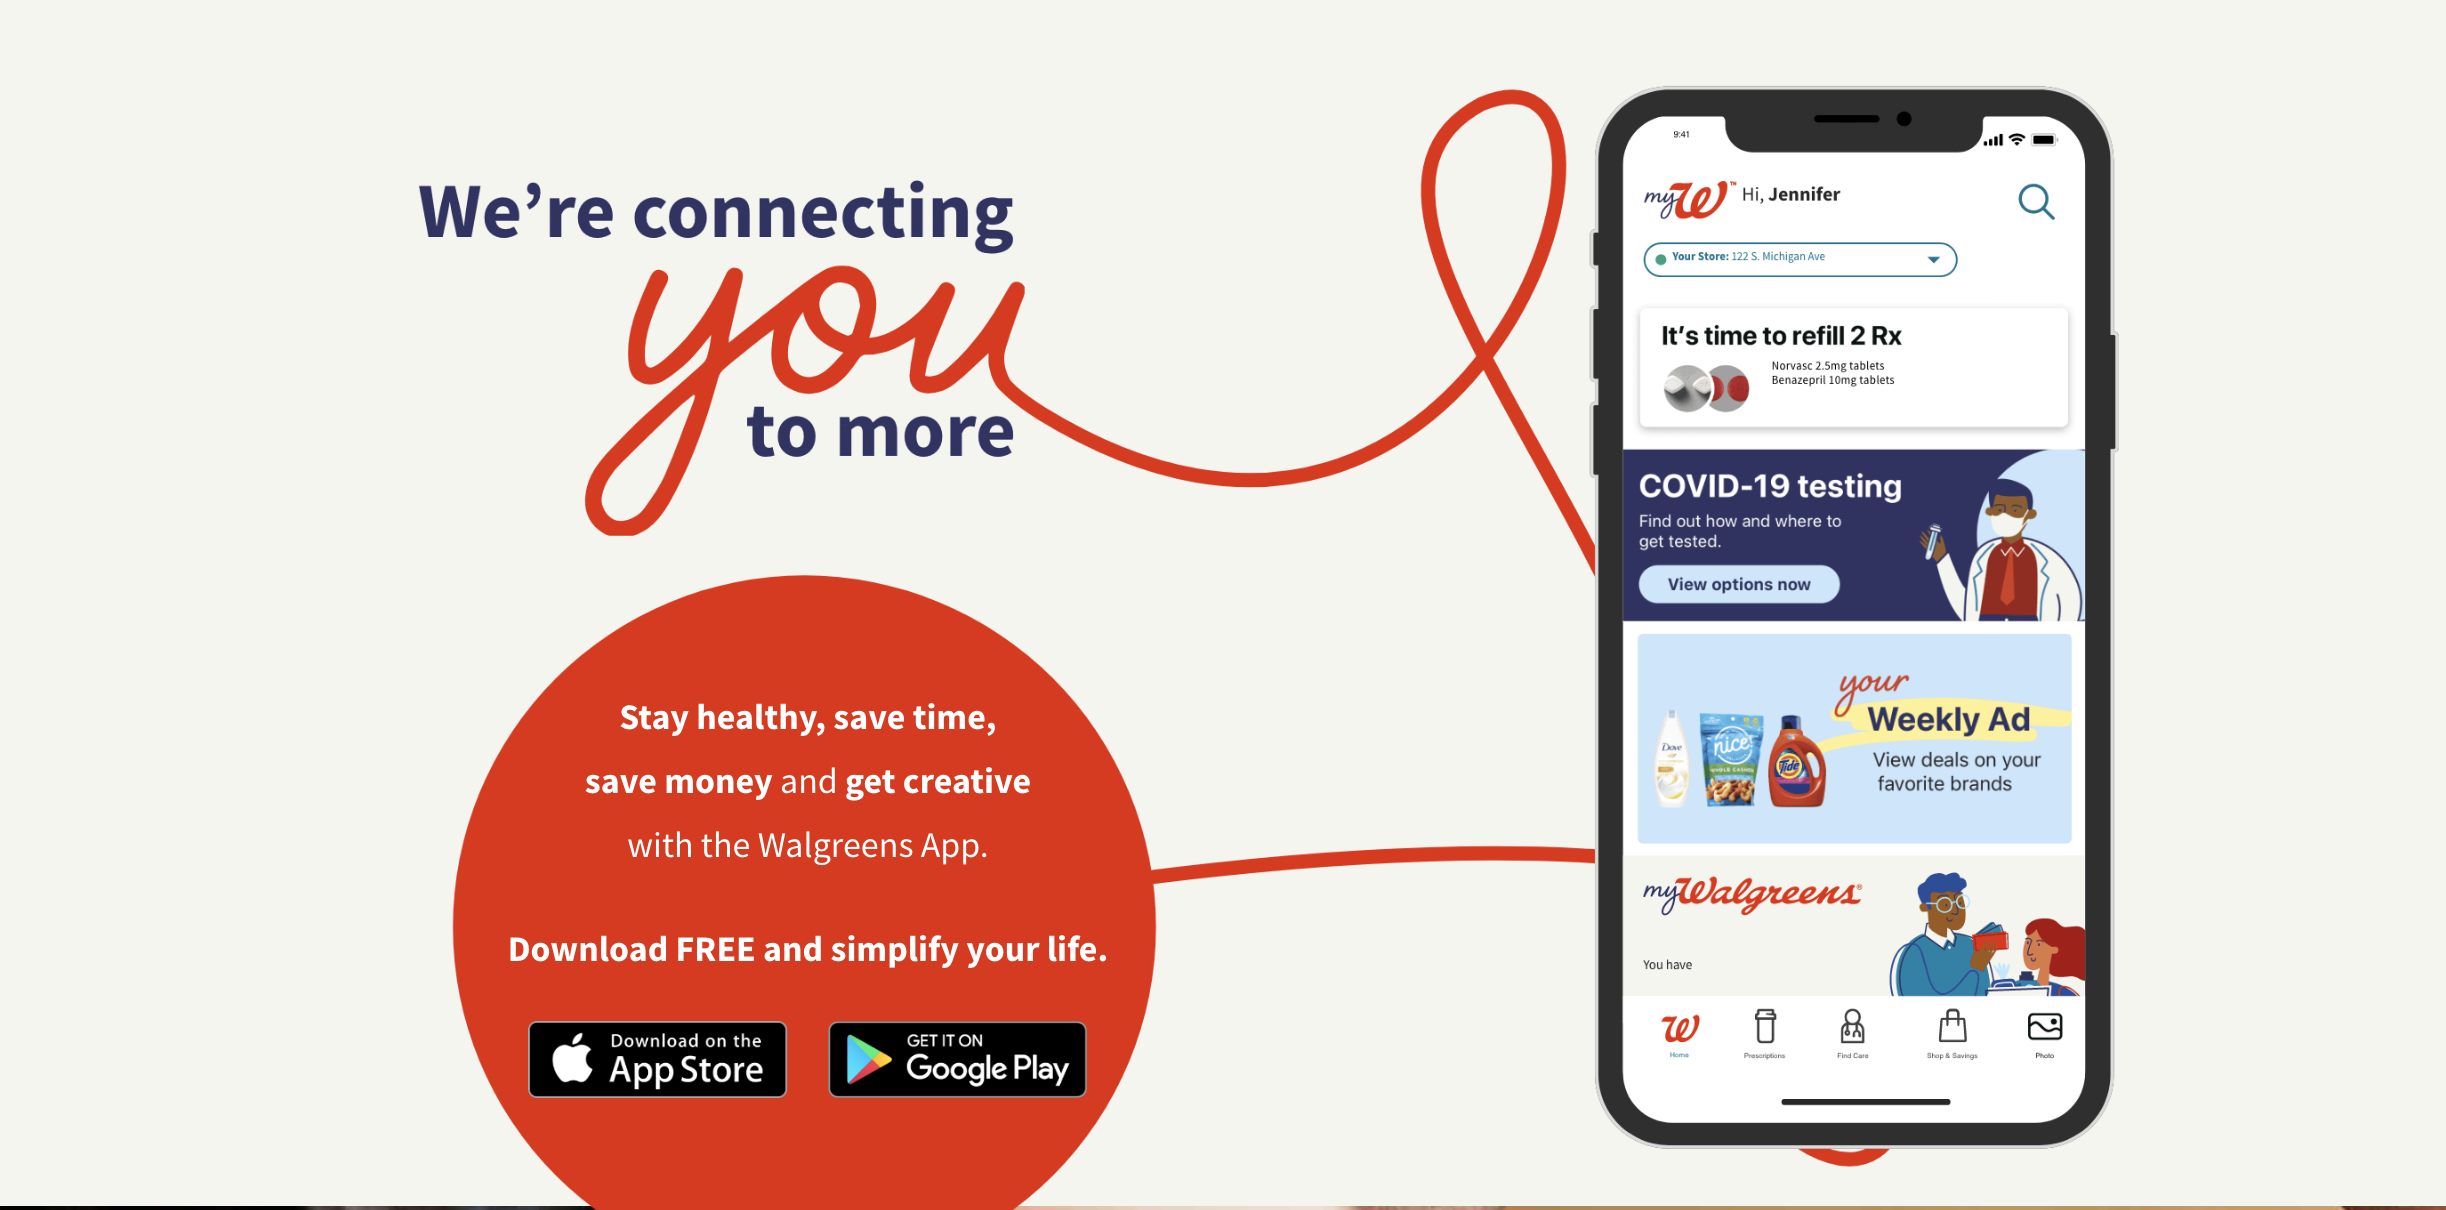 Walgreens mobile app with iphone screen display and download buttons